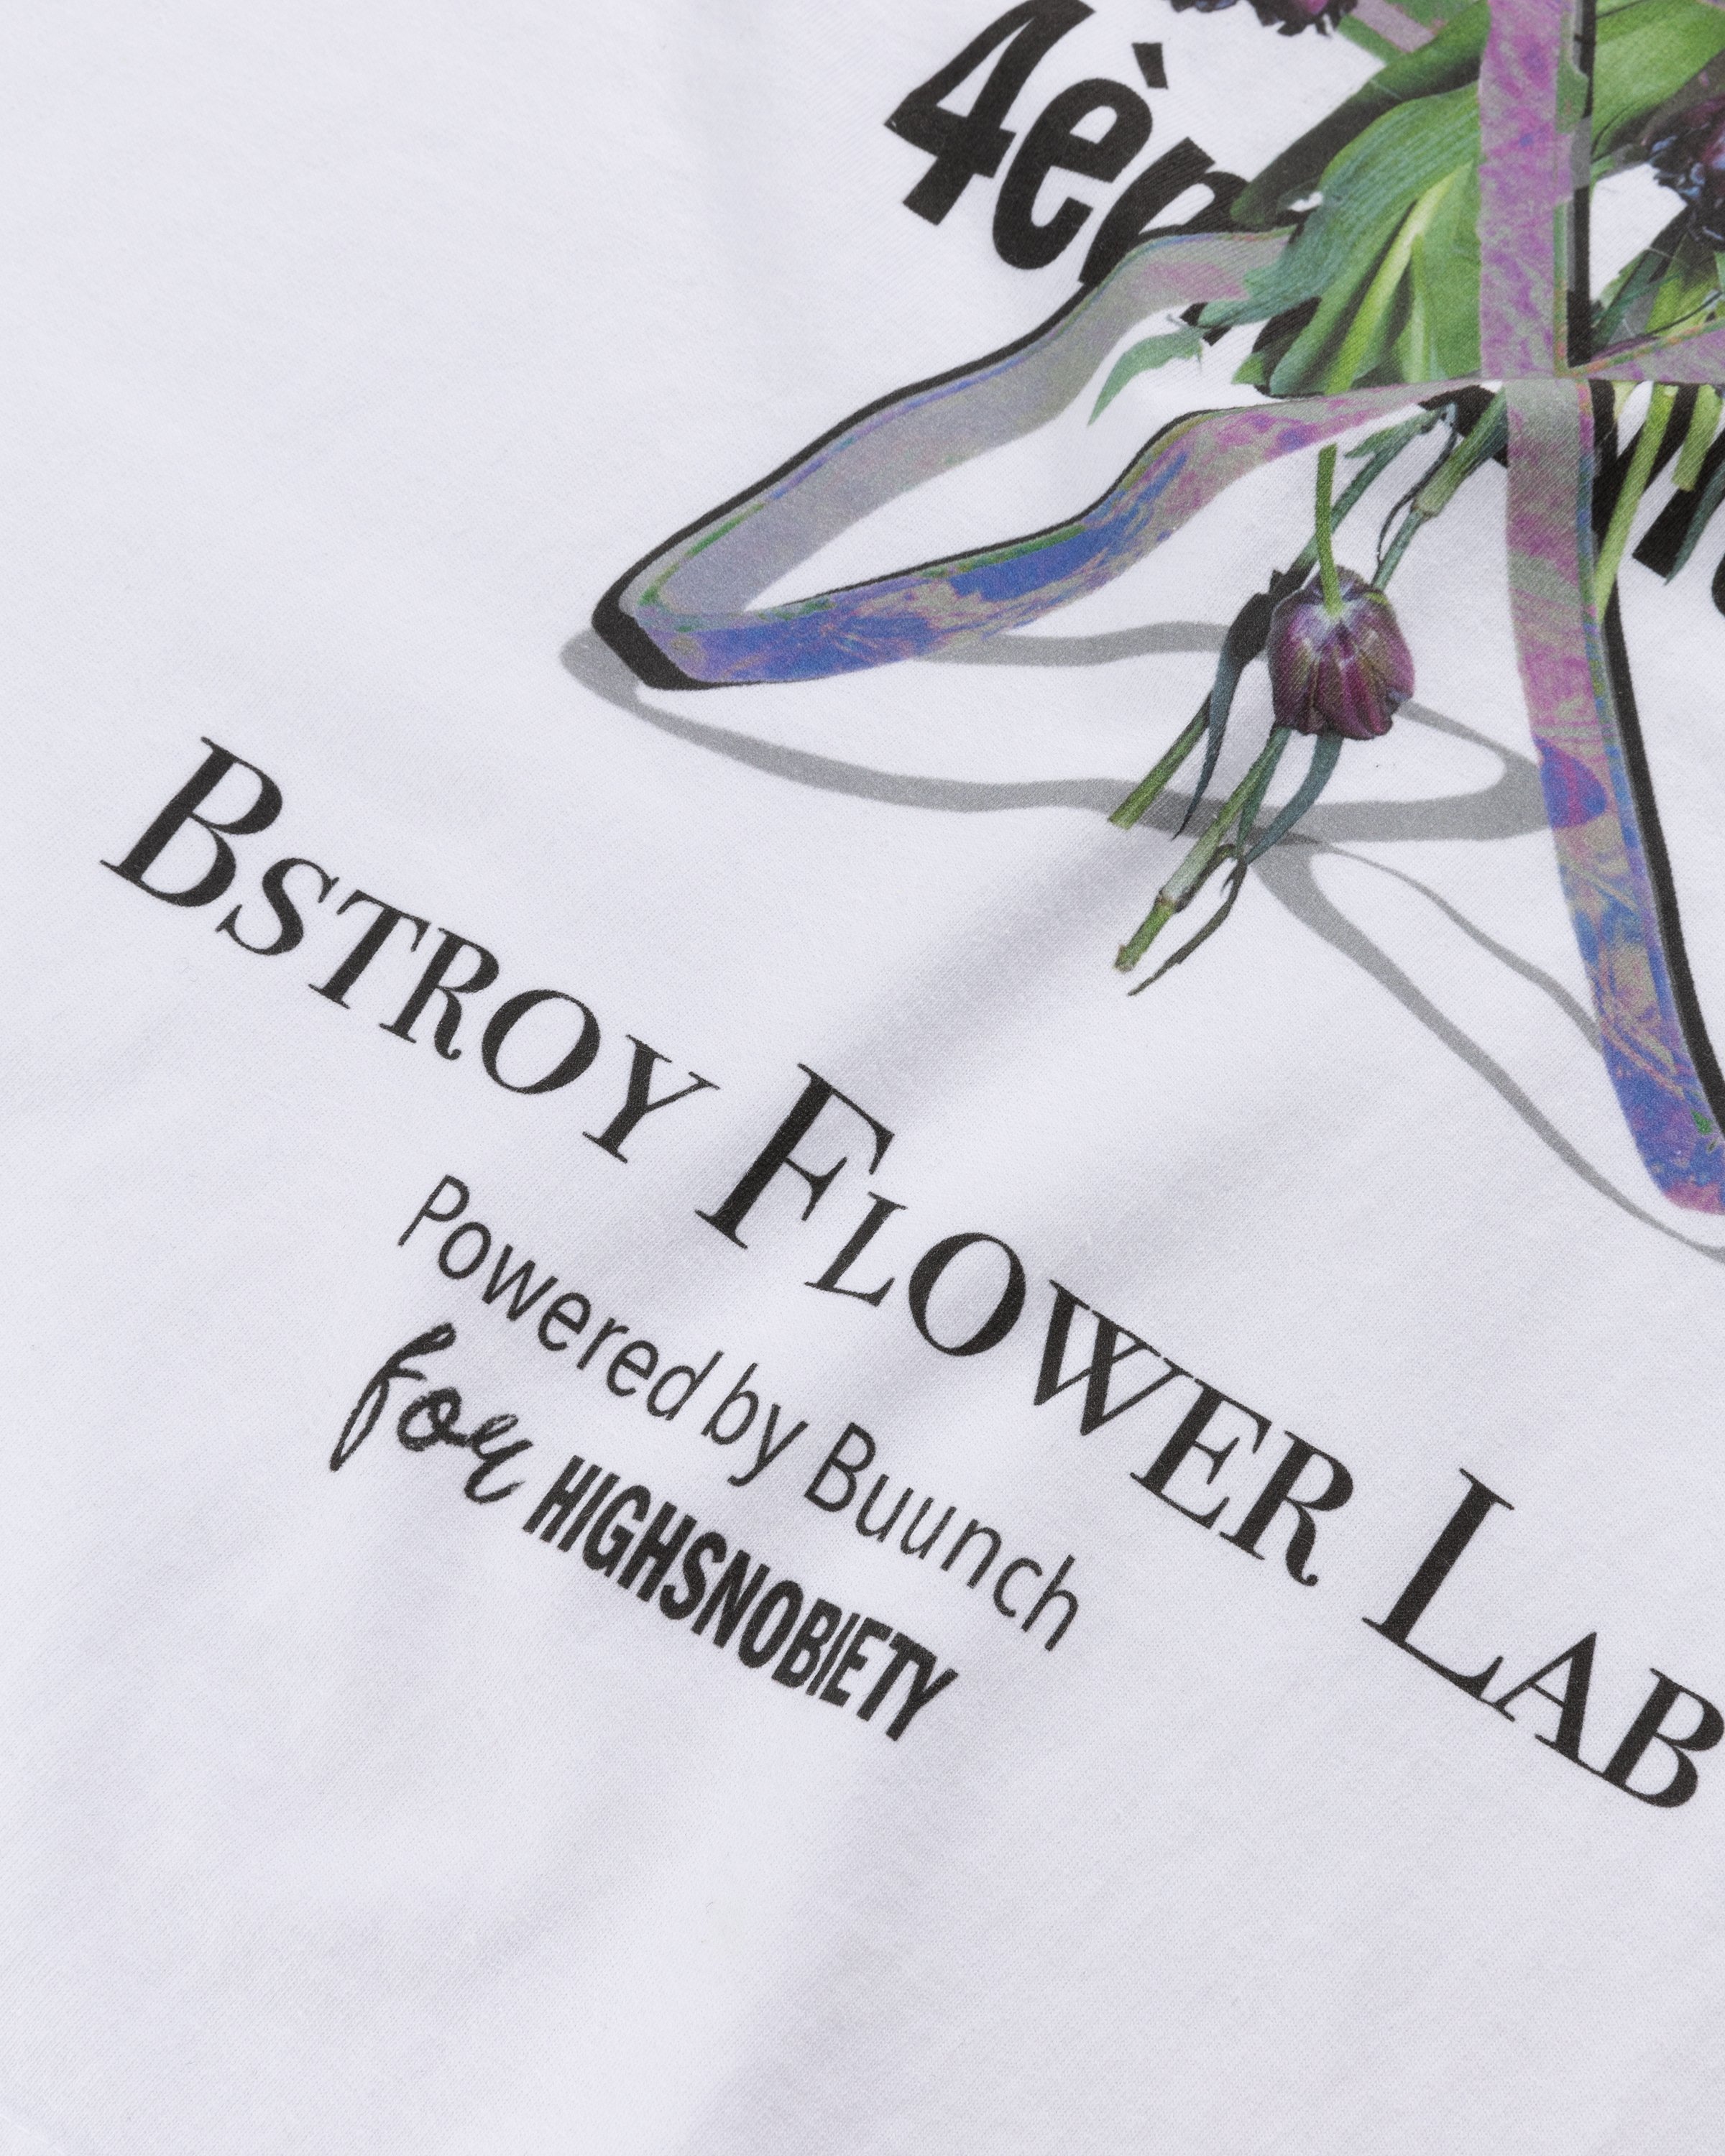 Bstroy x Highsnobiety - Not In Paris 4 Flower T-Shirt White - Clothing - White - Image 4